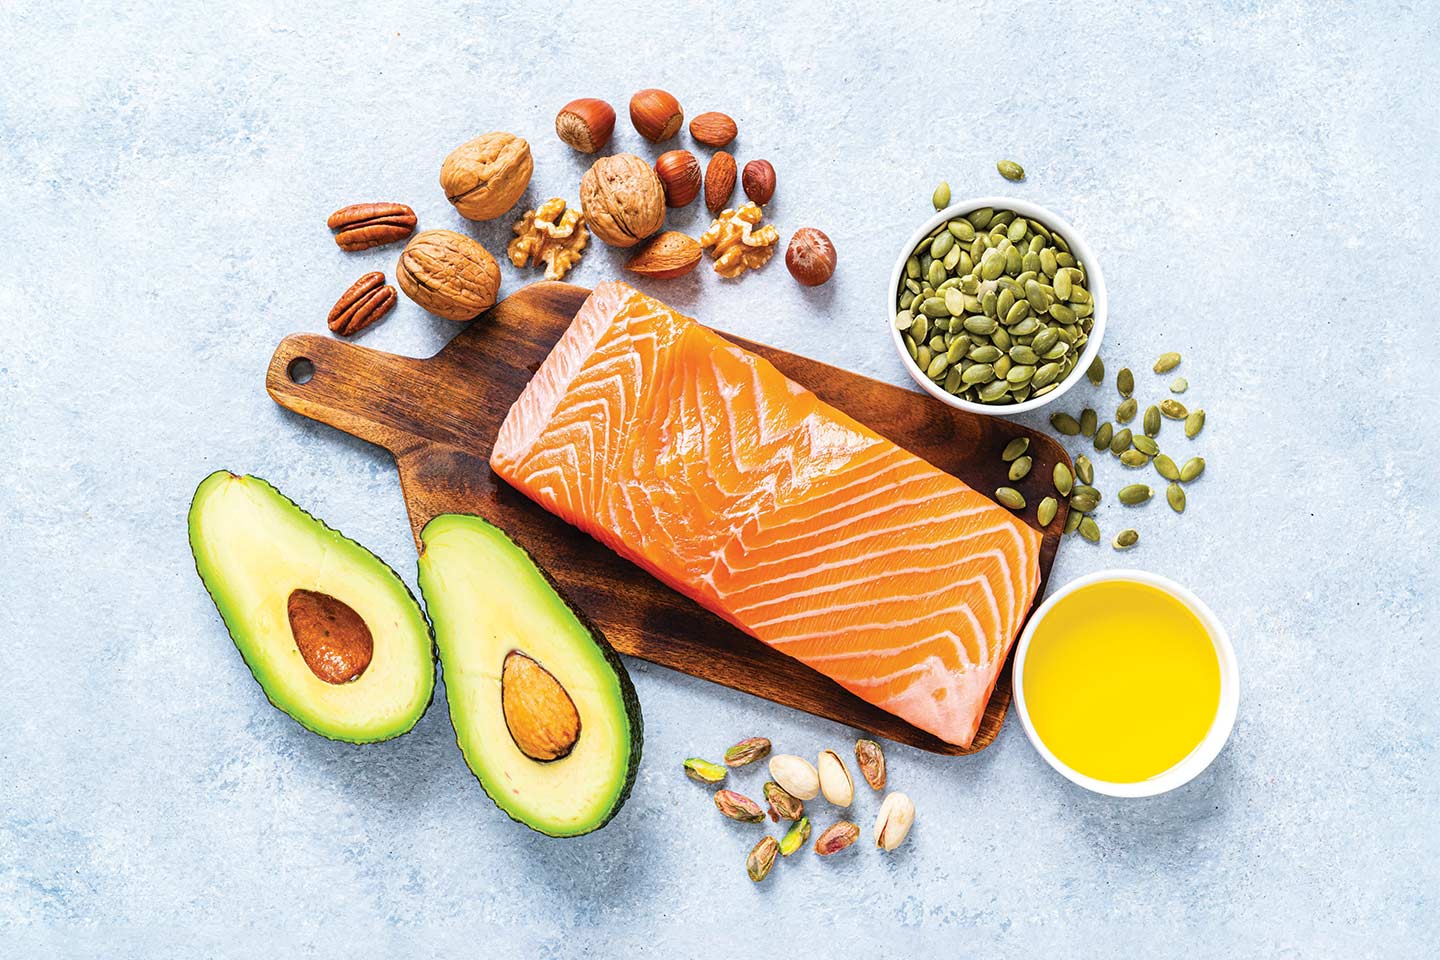 Foods with healthy fats